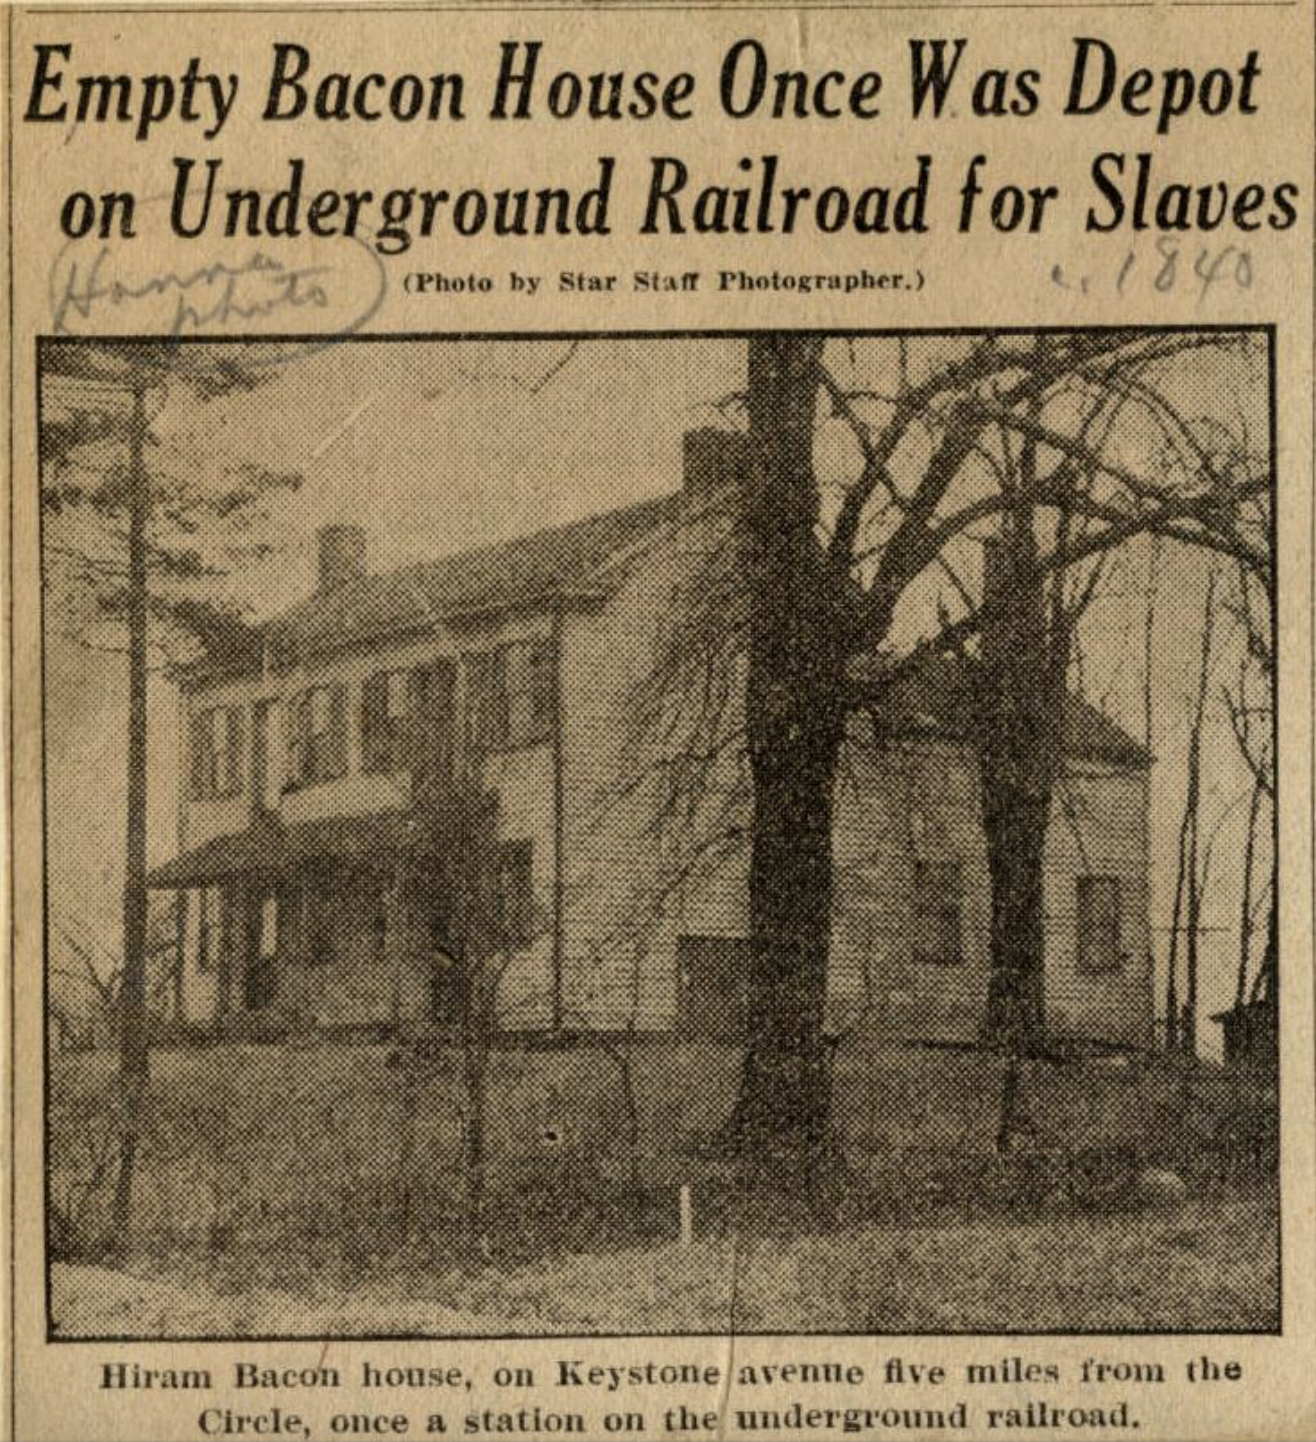 Newspaper clipping shows a photo of a two-story house. The headline above the photo reads "Empty Bacon House Once Was a Depot on Underground Railroad for Slaves". The caption underneath reads "Hiram Bacon house, on Keystone avenue five miles from the Circle, once a station on the underground railroad.